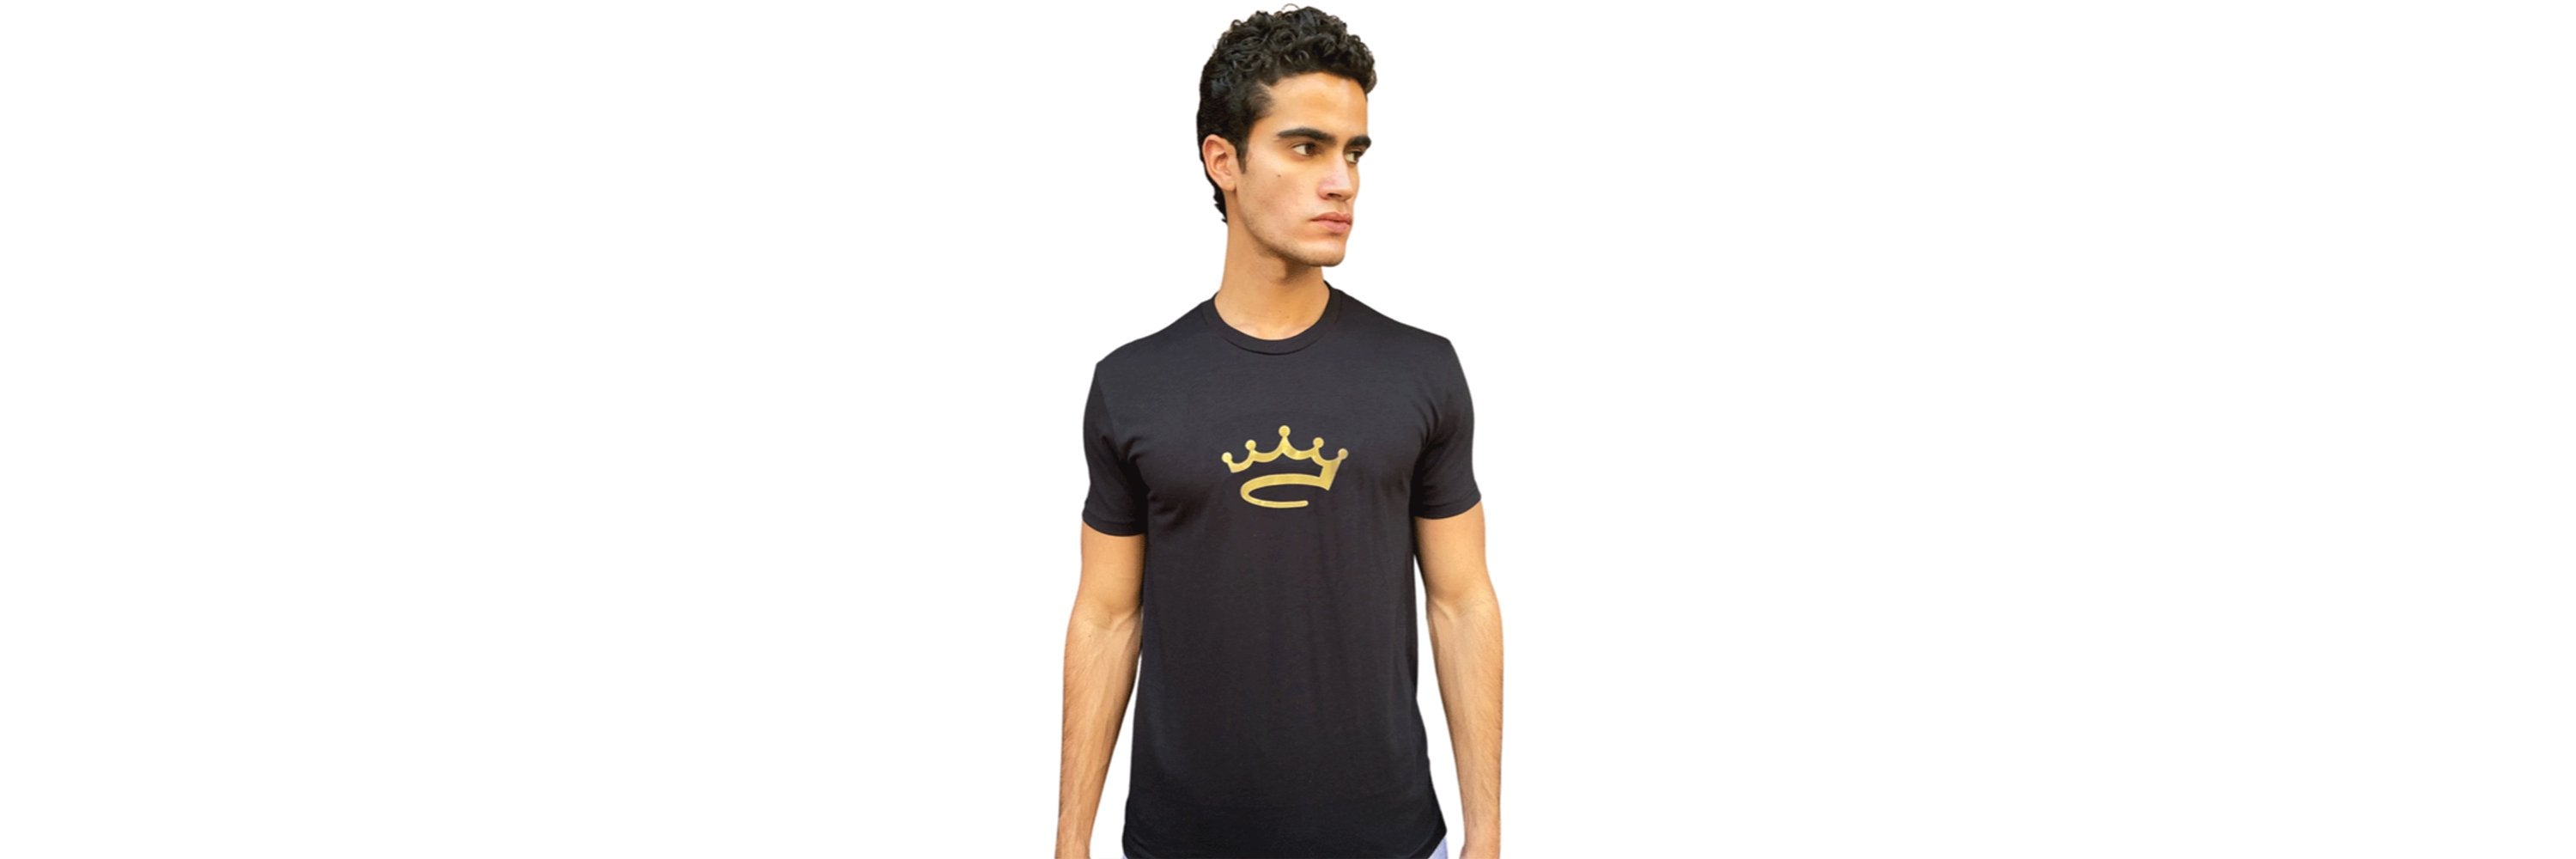 man black and gold crowned brand shirt